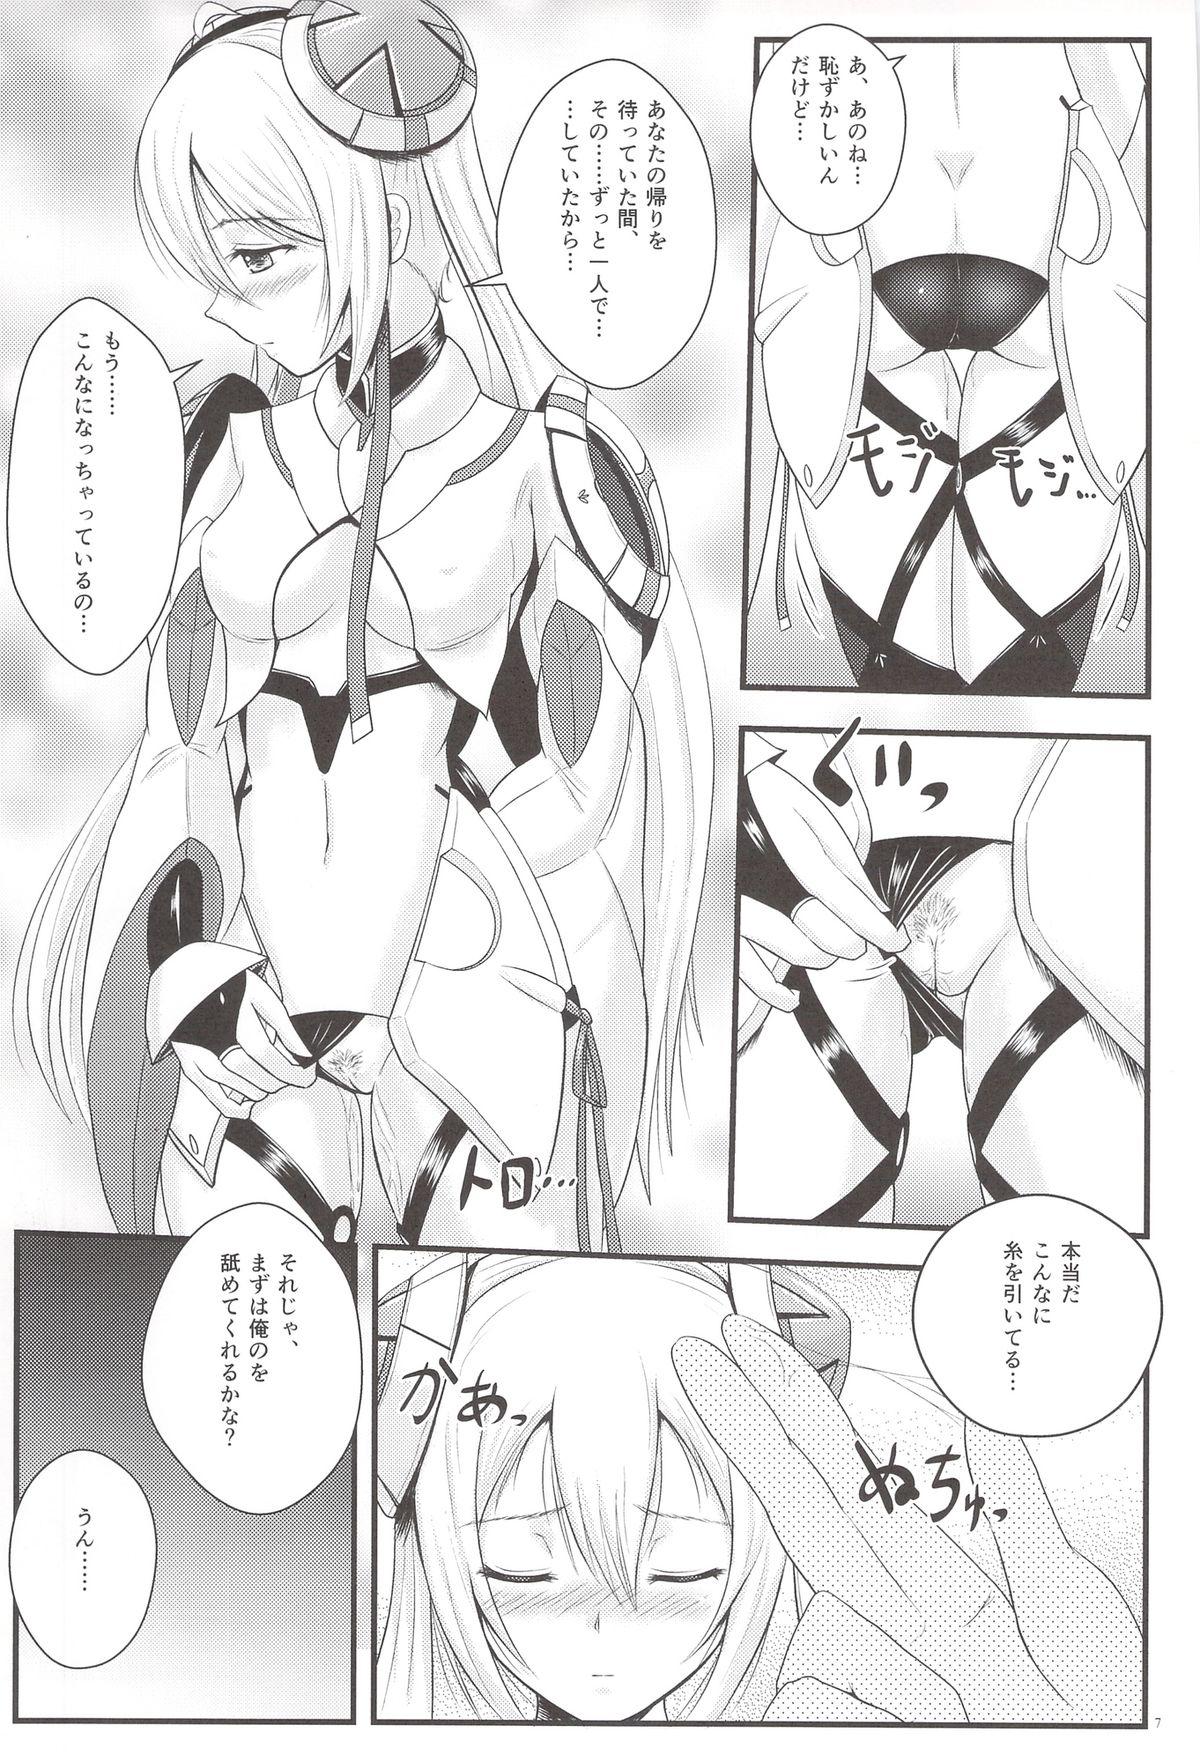 Eat When I think of you - Phantasy star online 2 Culos - Page 6